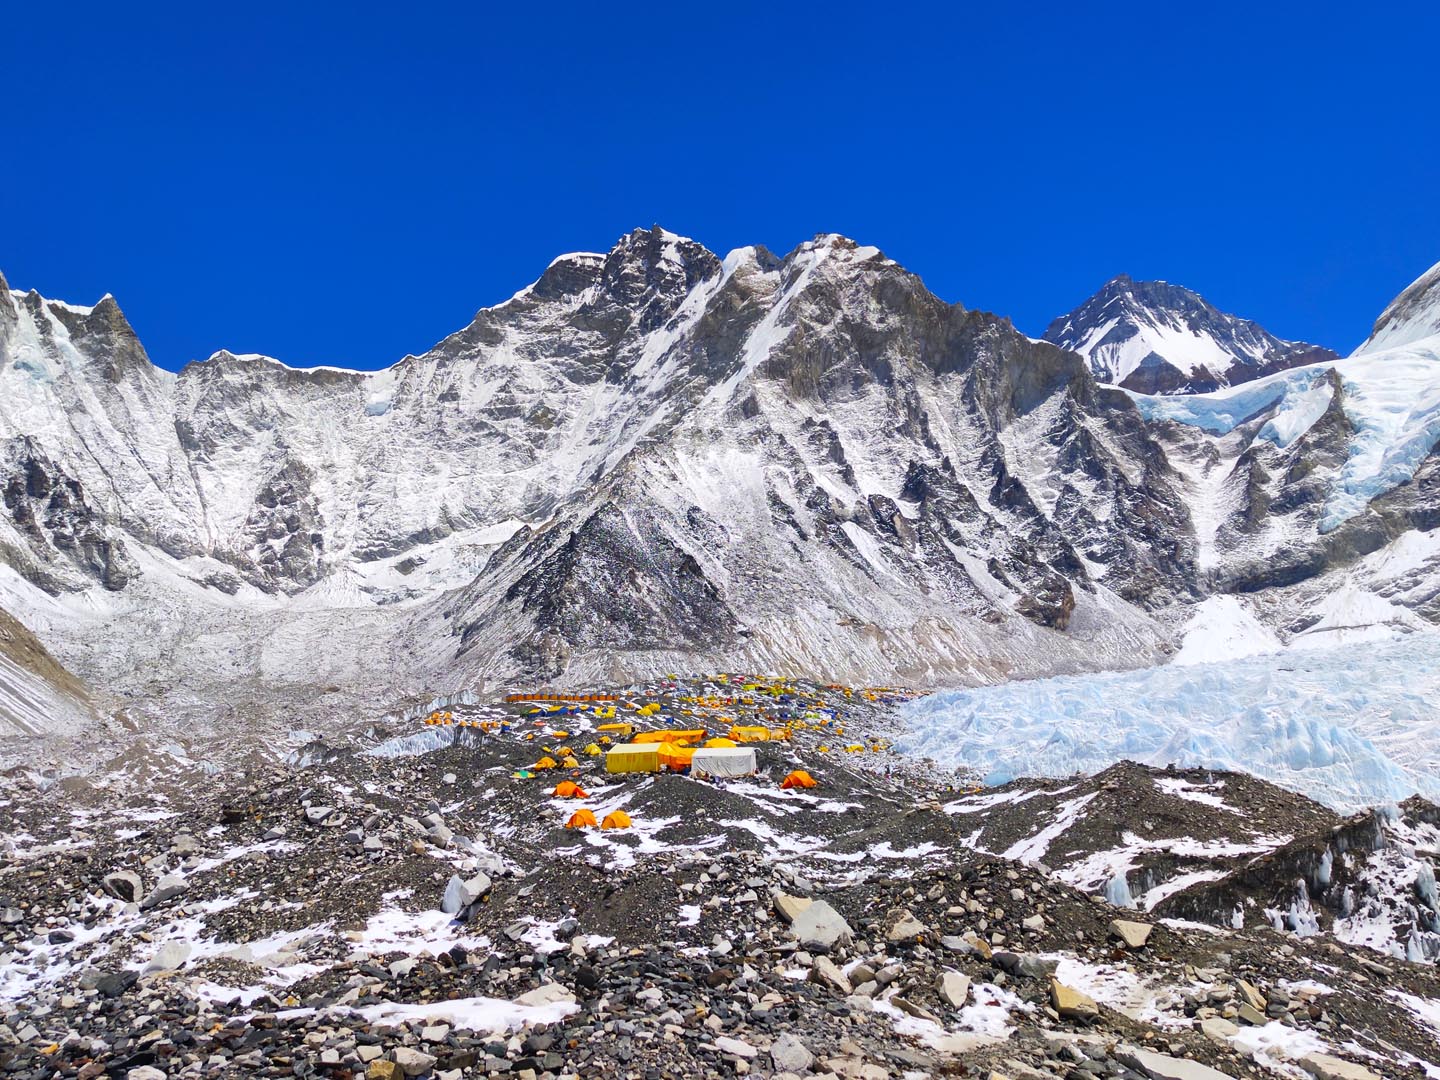 Colorful tents at Everest Base Camp during climbing season